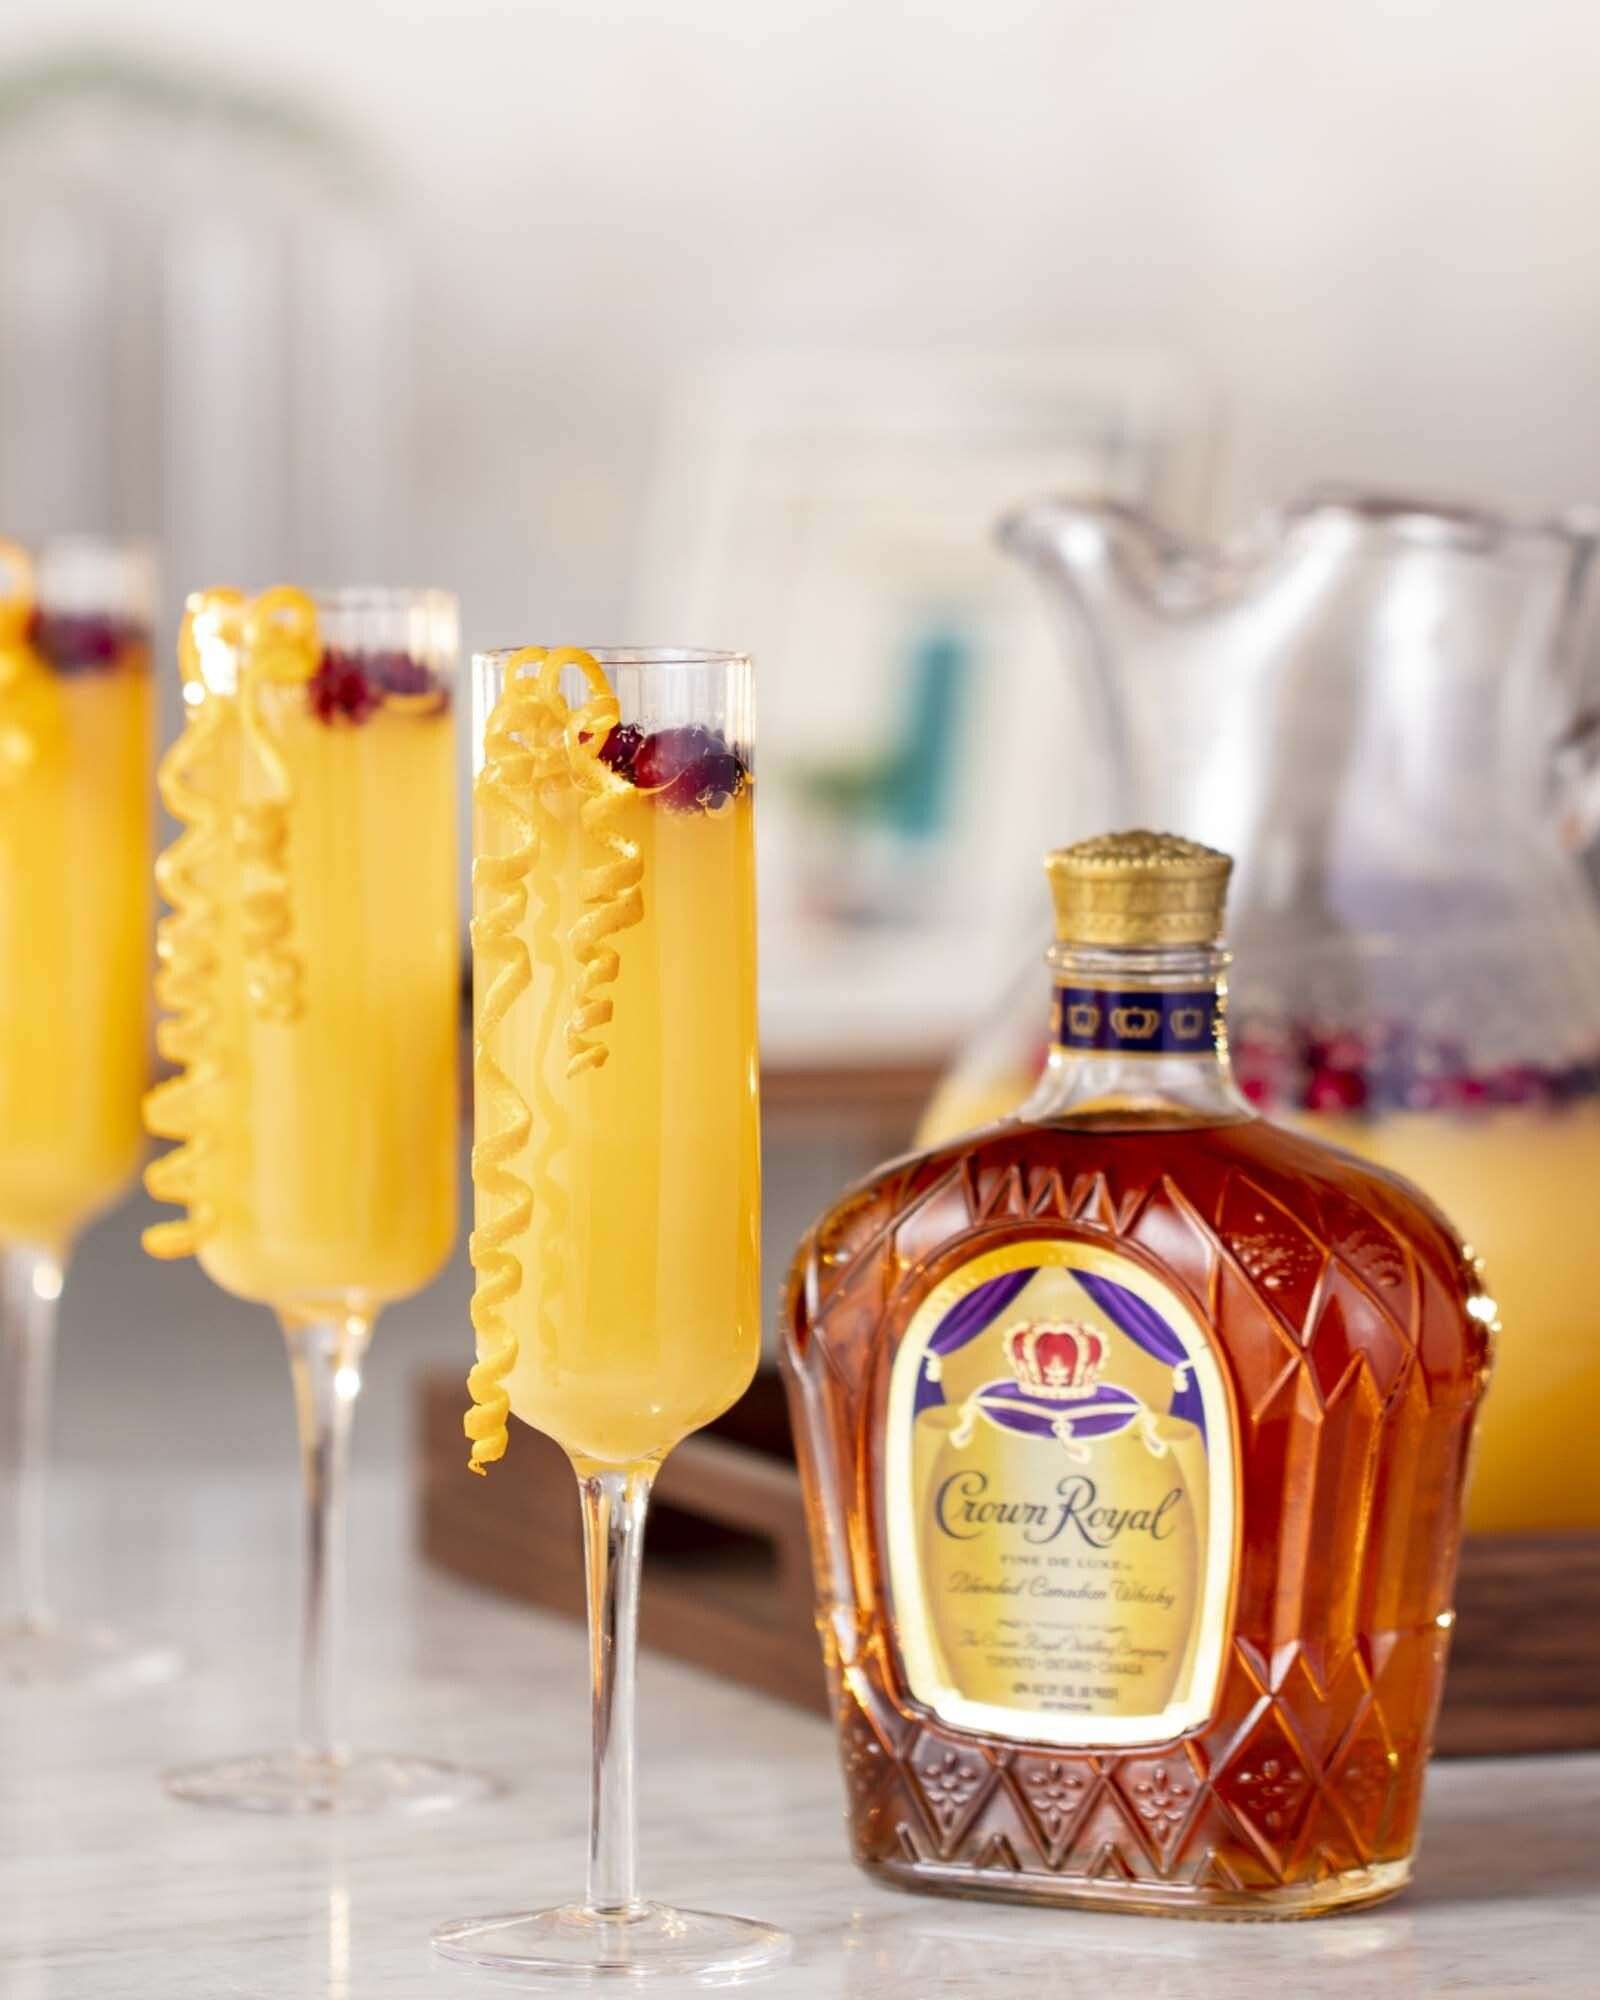 Crown Royal Mimosa Whisky Cocktail Recipe